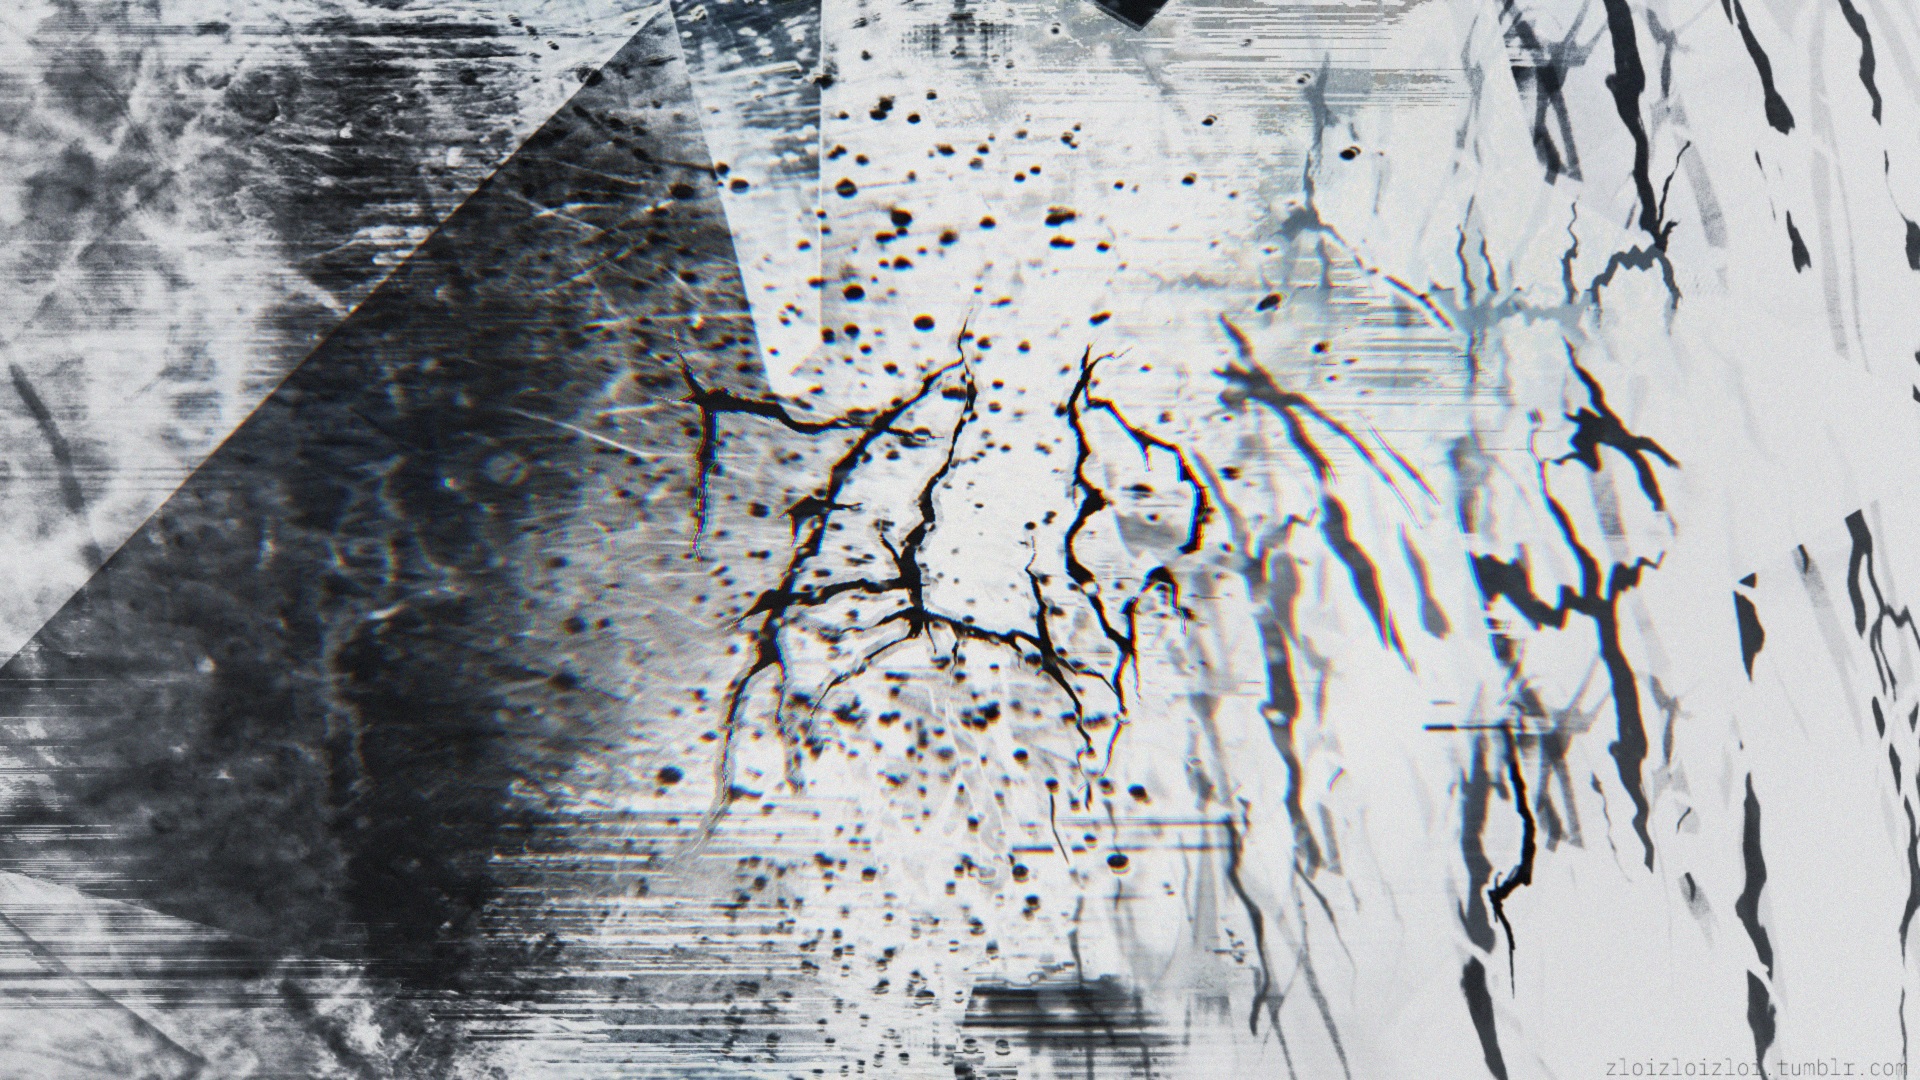 General 1920x1080 glitch art abstract shapes gray